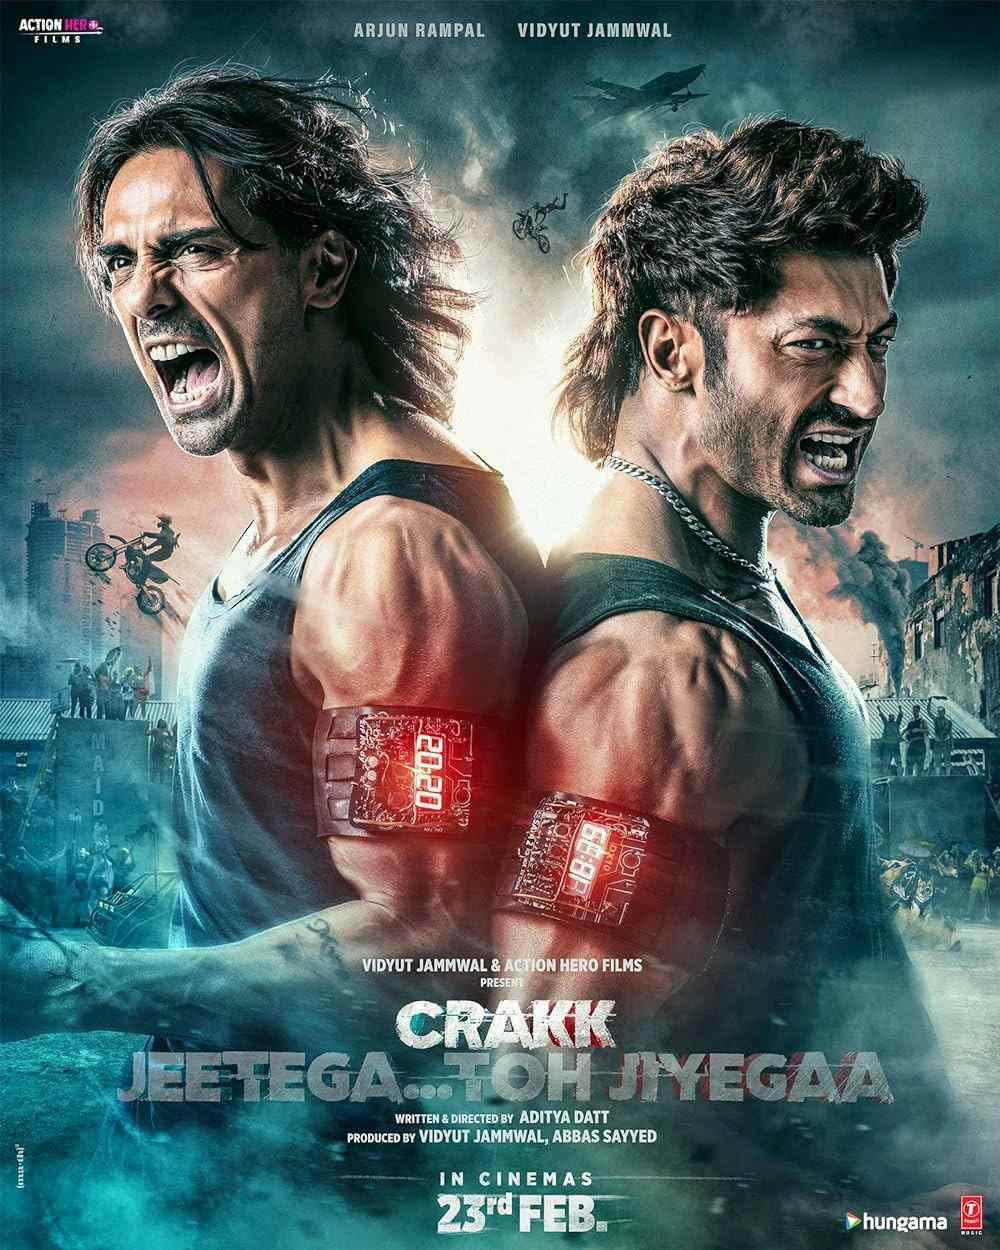 Featured picture for the movie; CRAKK - BE THE GREAT